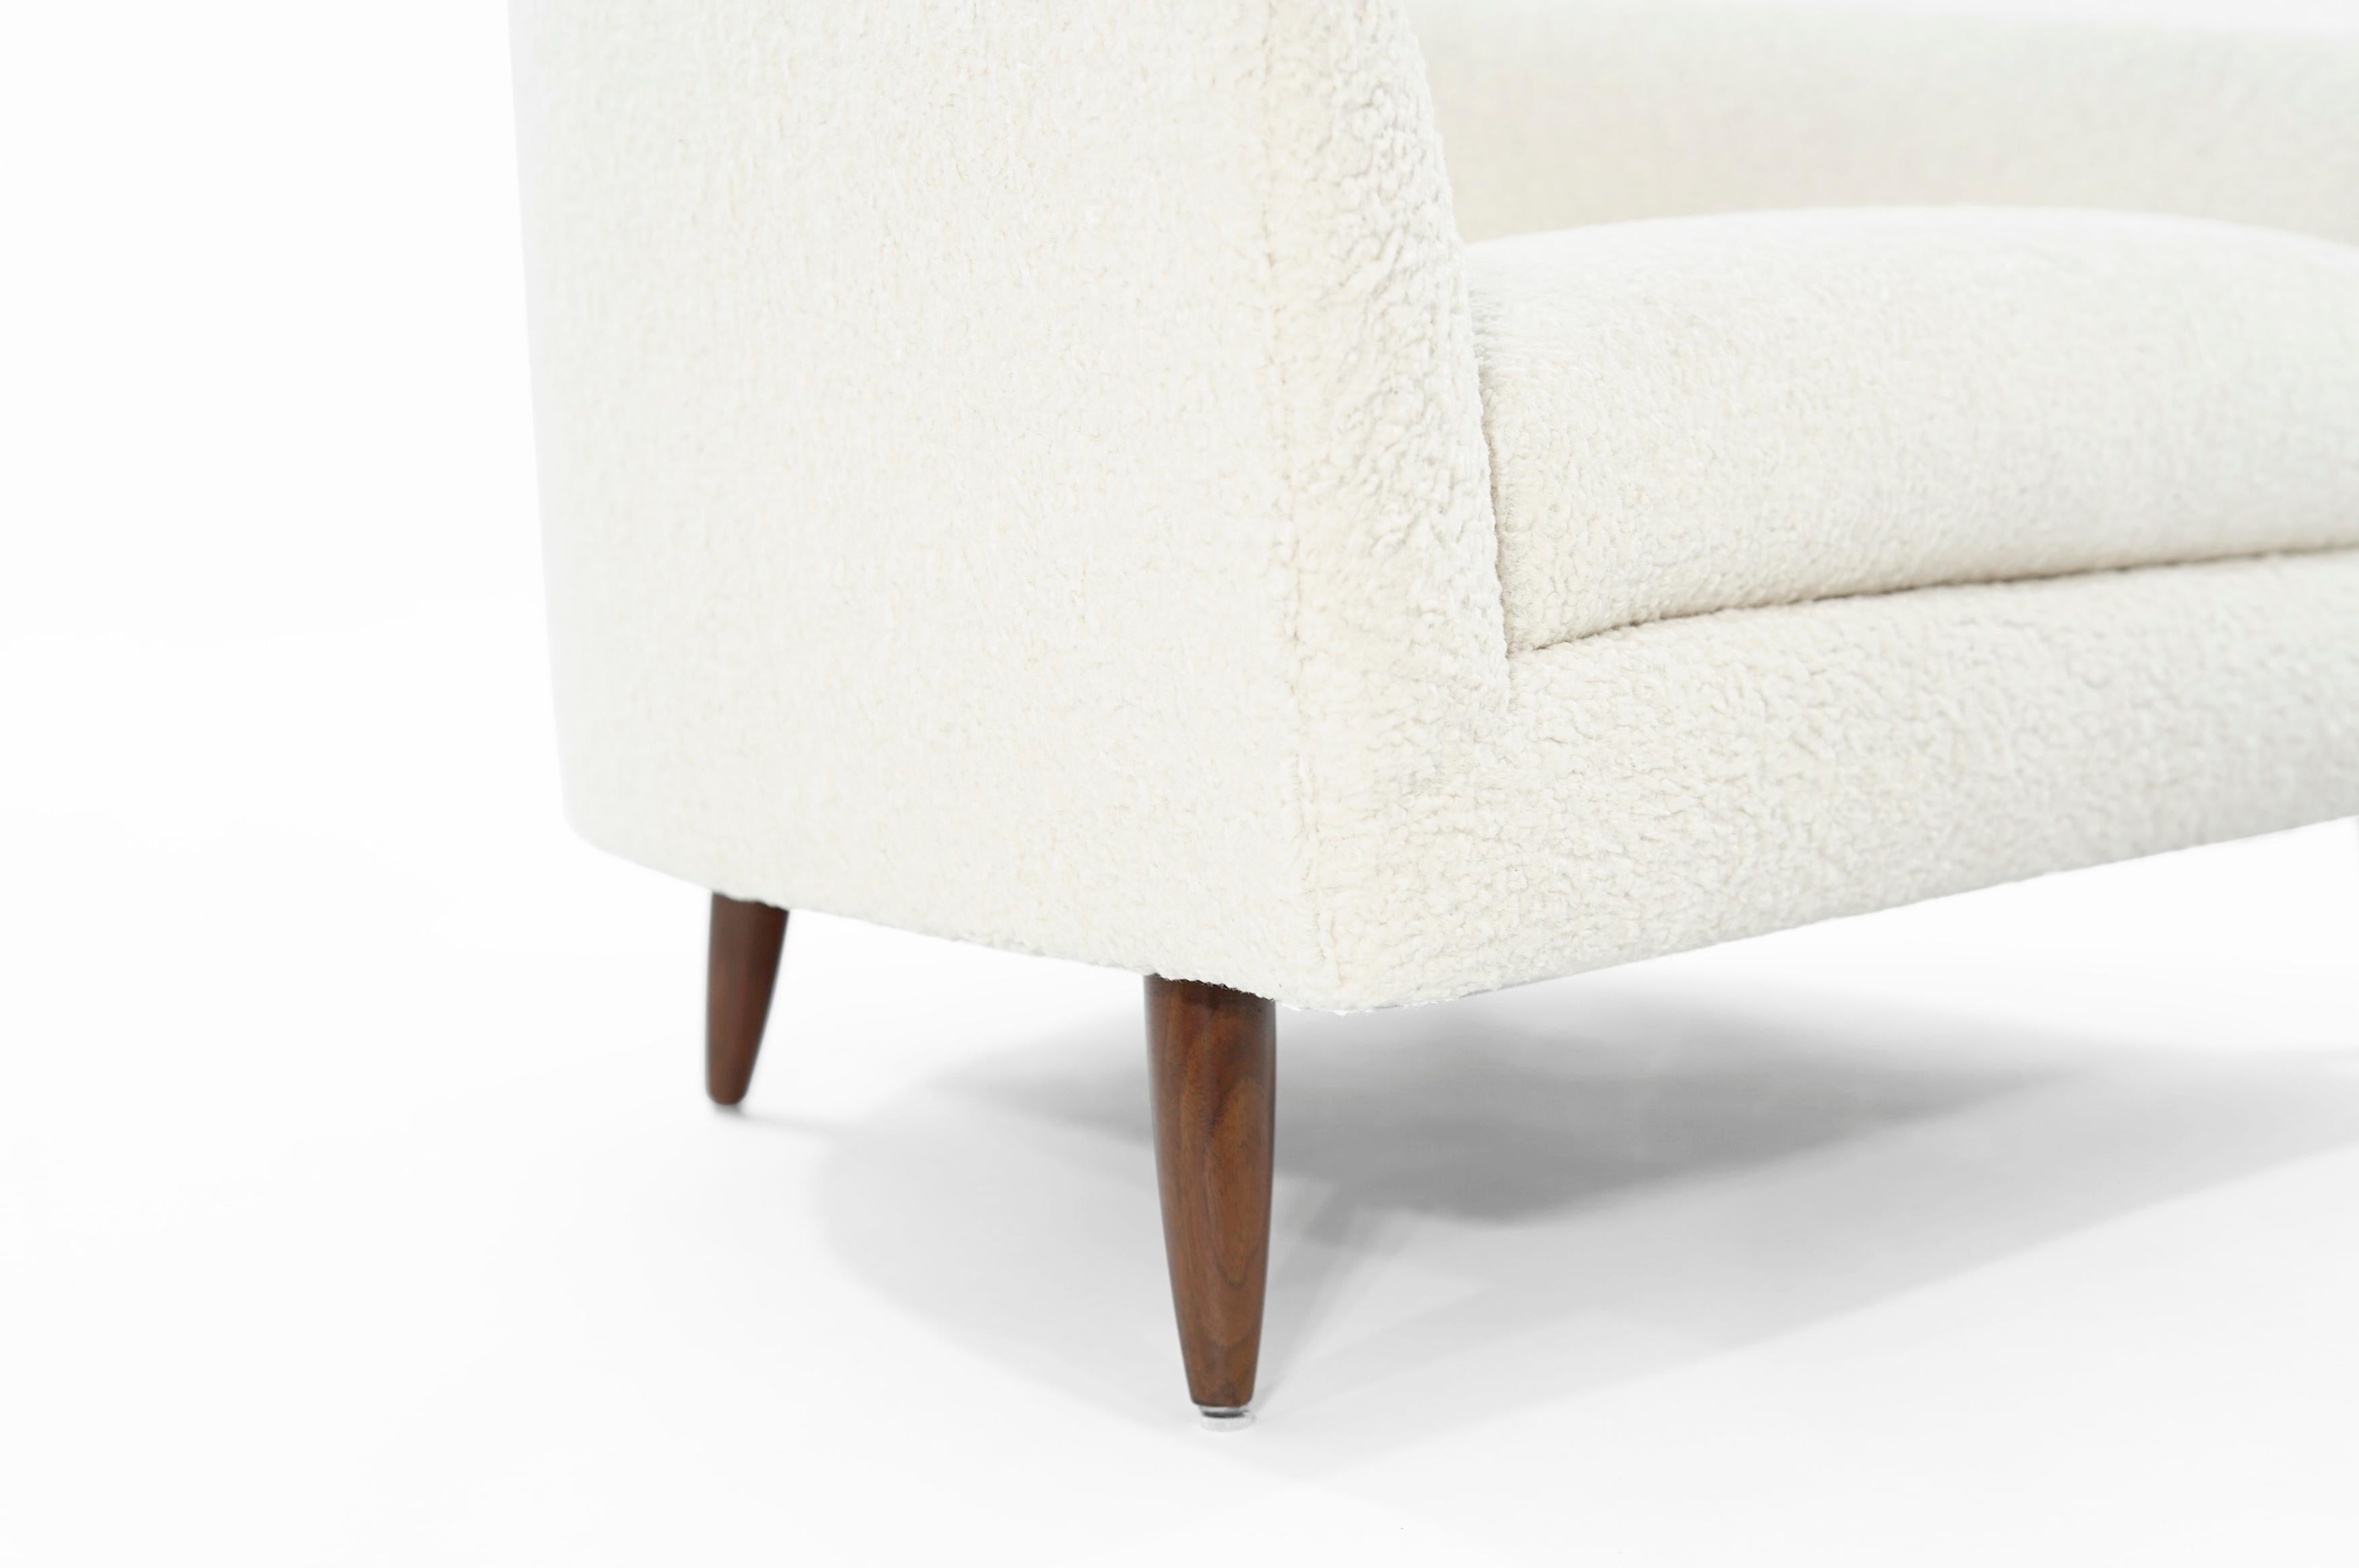 Adrian Pearsall for Craft Associates Cloud Lounges in Bouclé, Model 1415 1